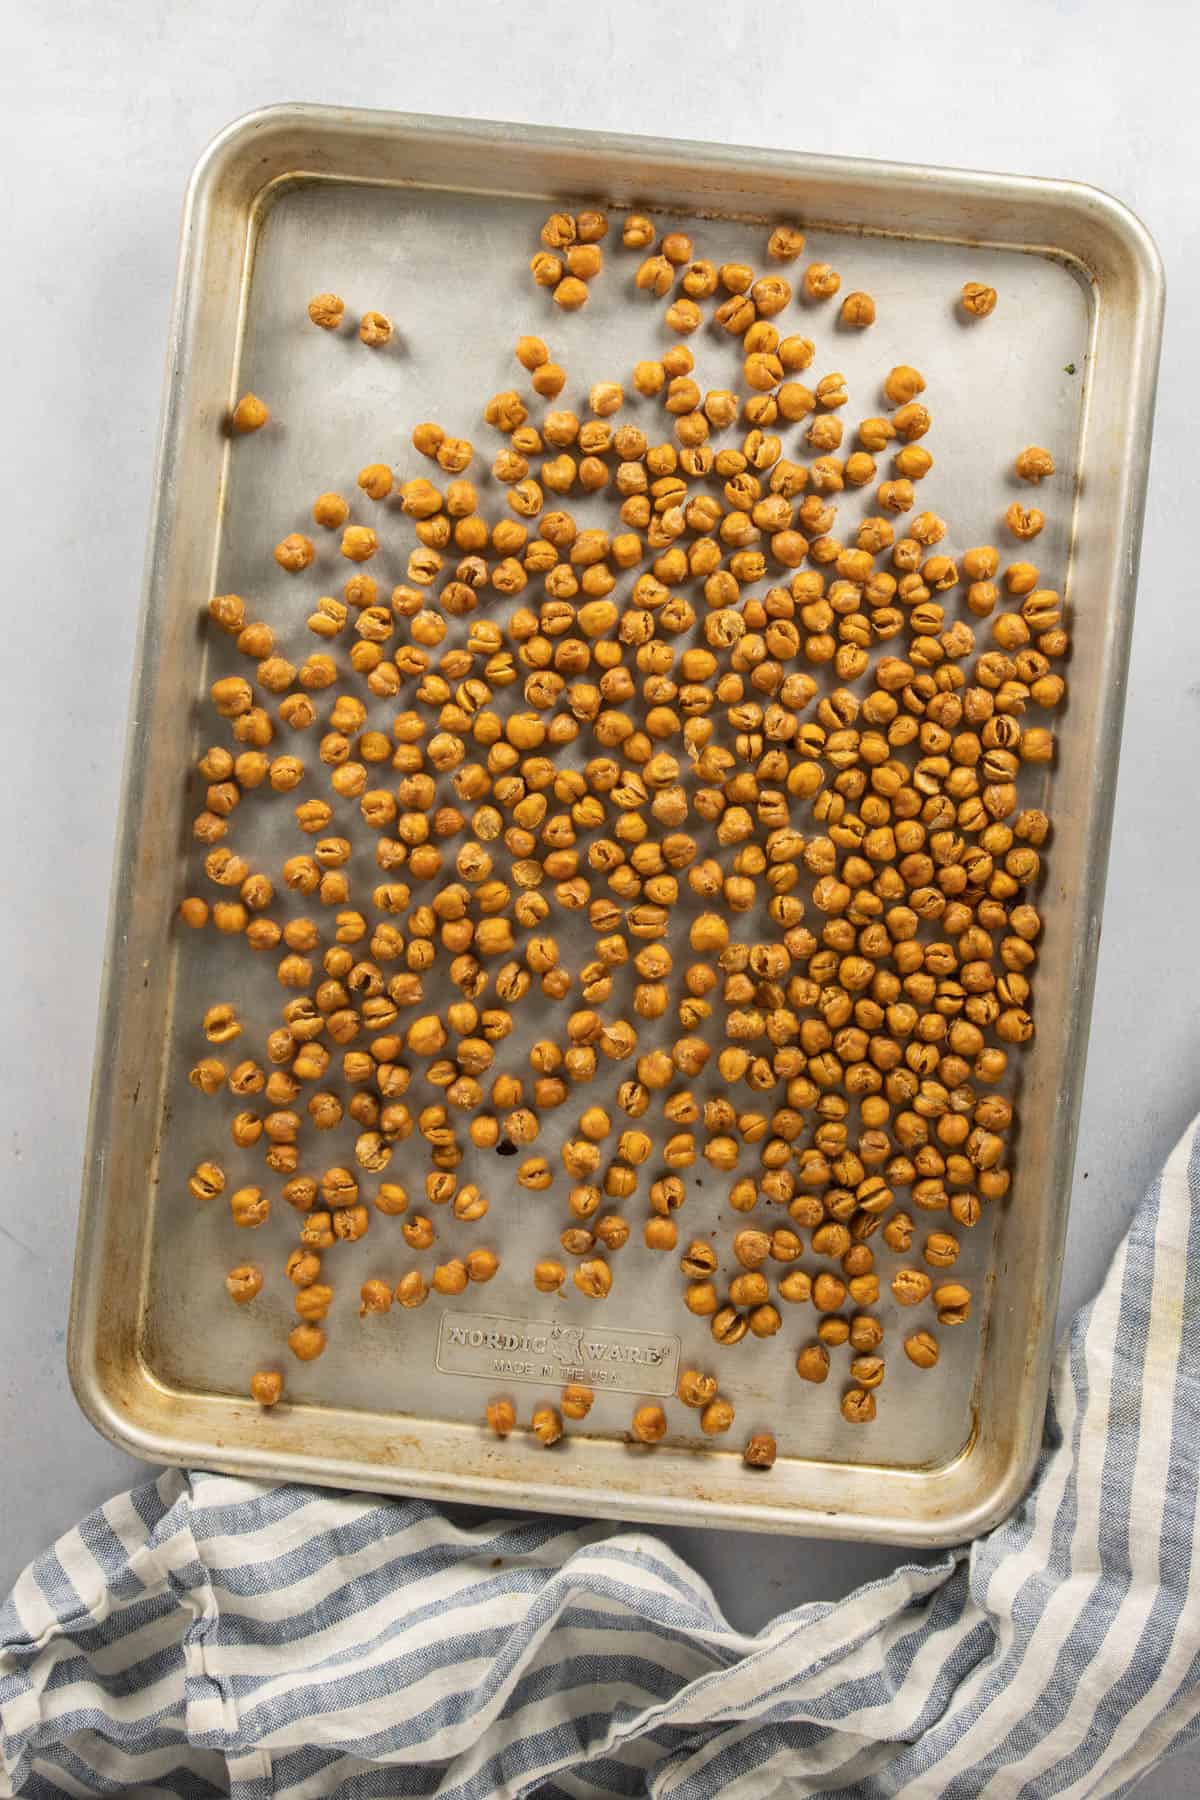 Roasted chana on baking sheet after removing from oven